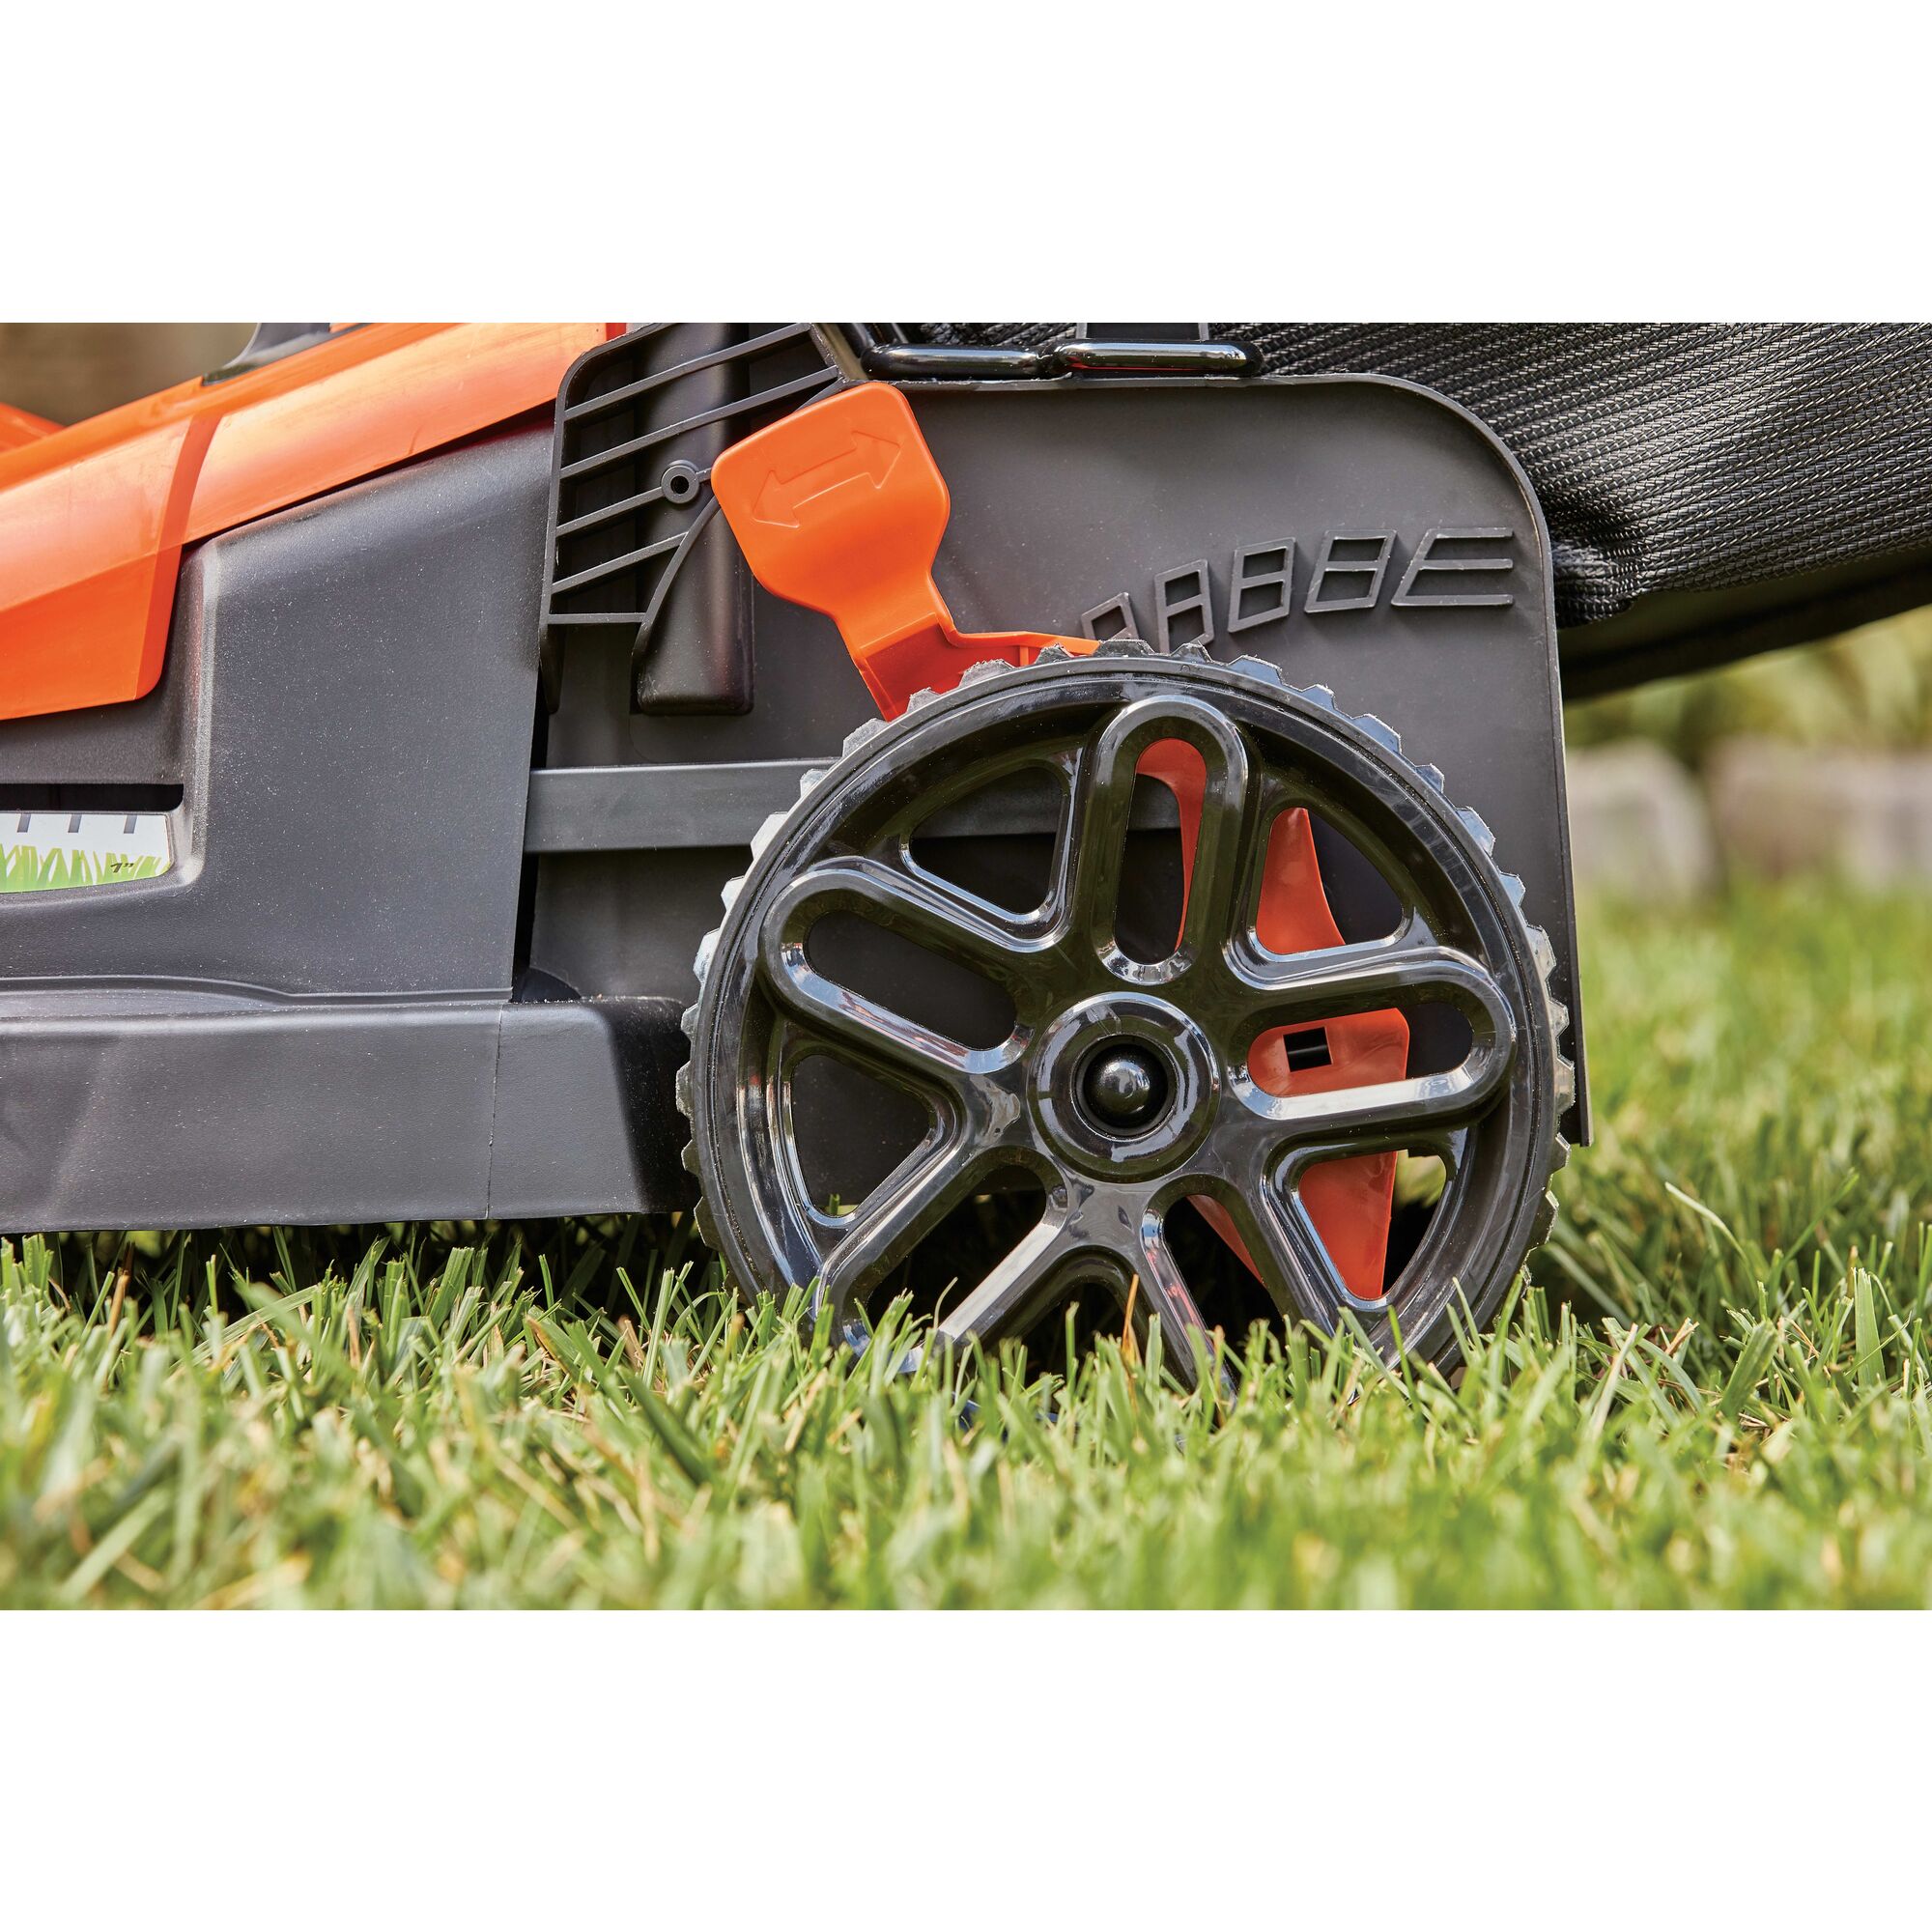 10 Amp 15 inch Electric Lawn Mower with Rugged wheel treads feature.